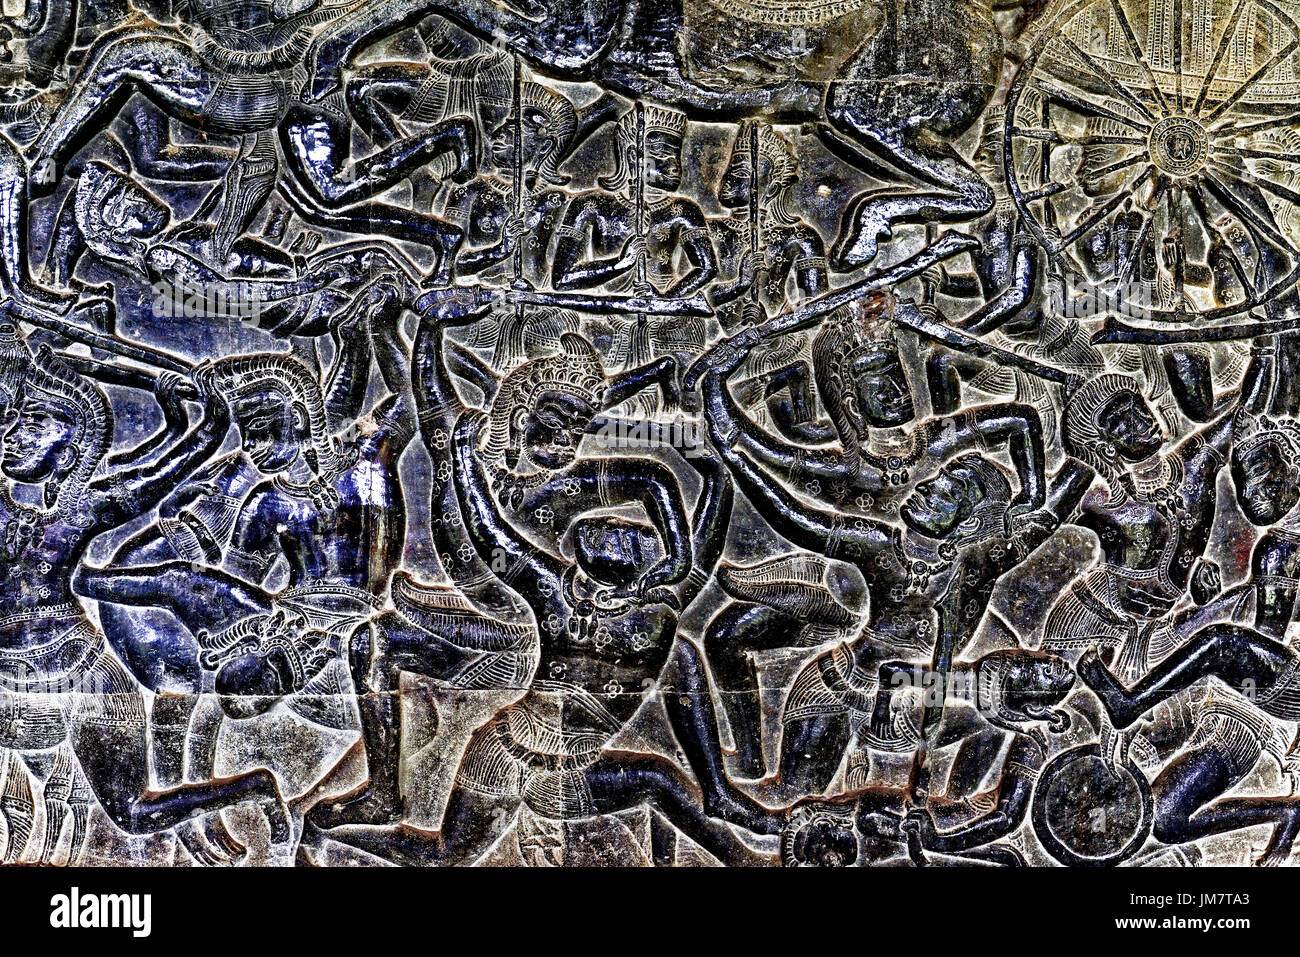 Cambodia Angkor Wat internal temple complex wall carving Khmer warriors chariots and horses in battle Stock Photo